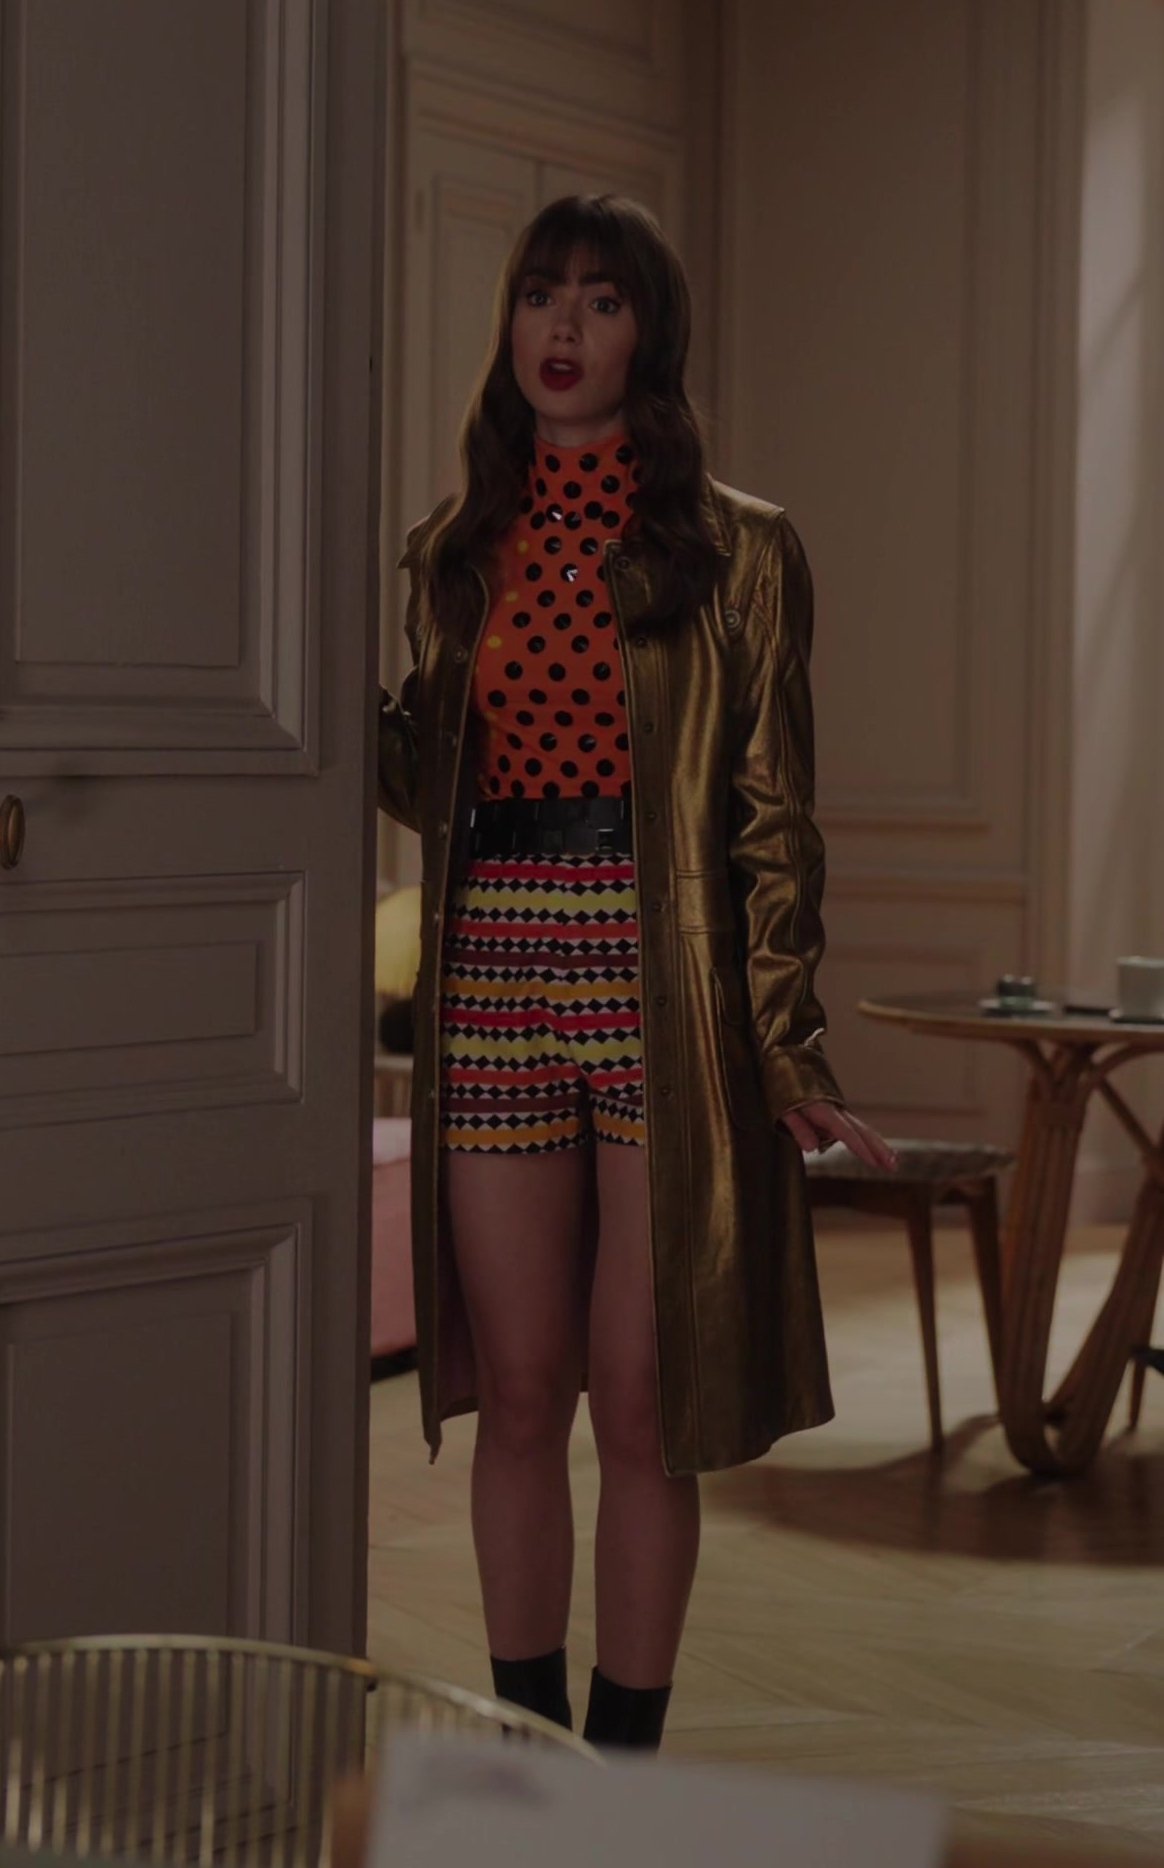 Worn on Emily in Paris TV Show - Printed Shorts of Lily Collins as Emily Cooper